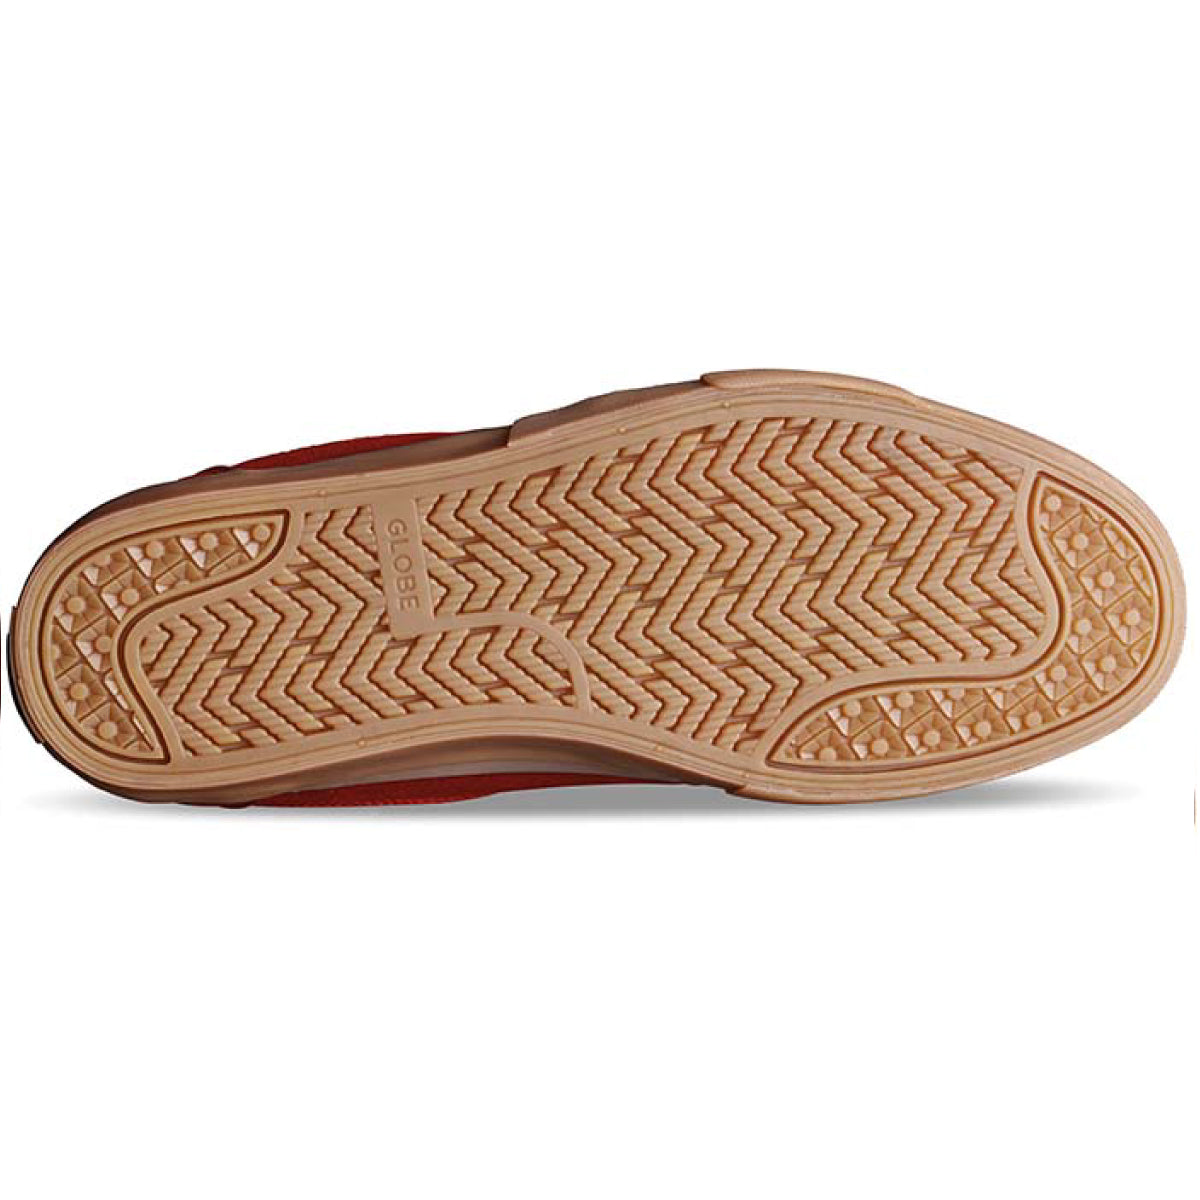 Globe Low shoes Mahalo Plus in Red/Gum